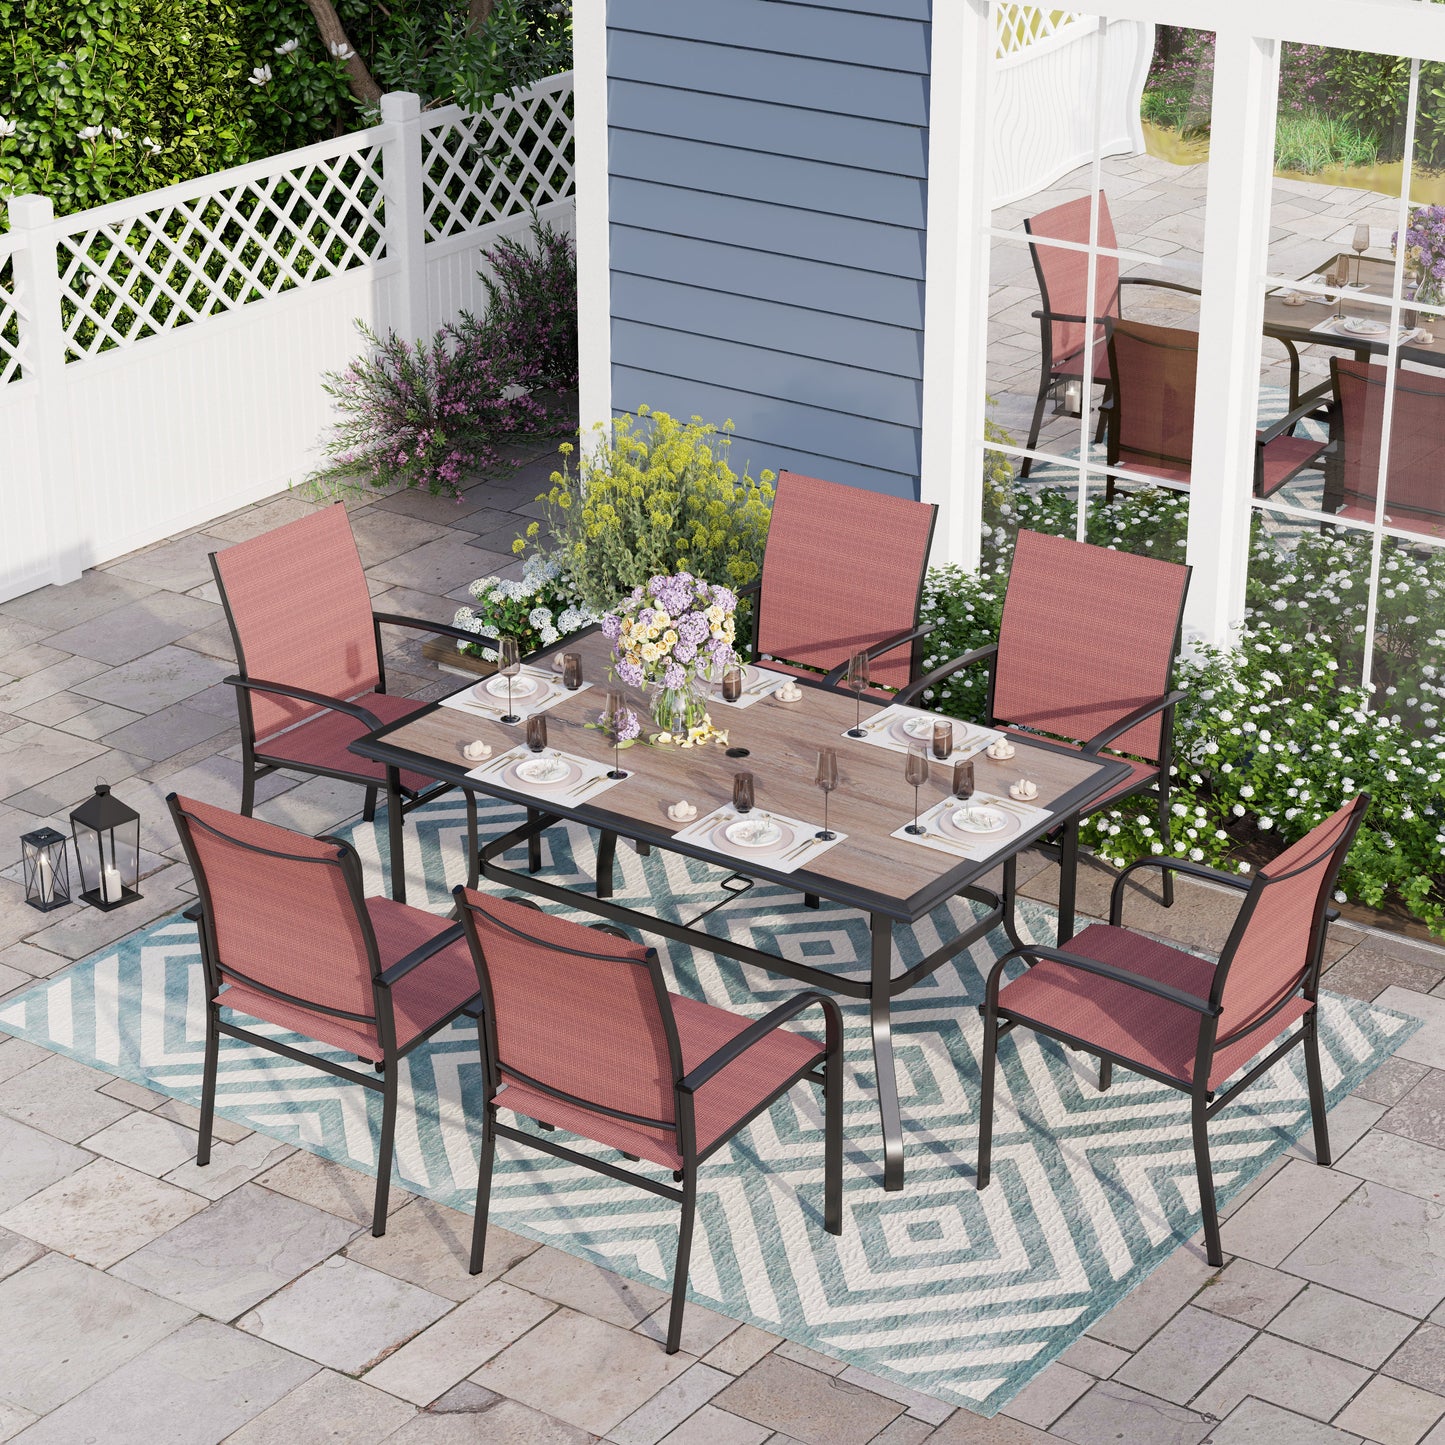 Sophia & William 7 Piece Outdoor Dining Set with Textilene Chairs and Rectangular Table